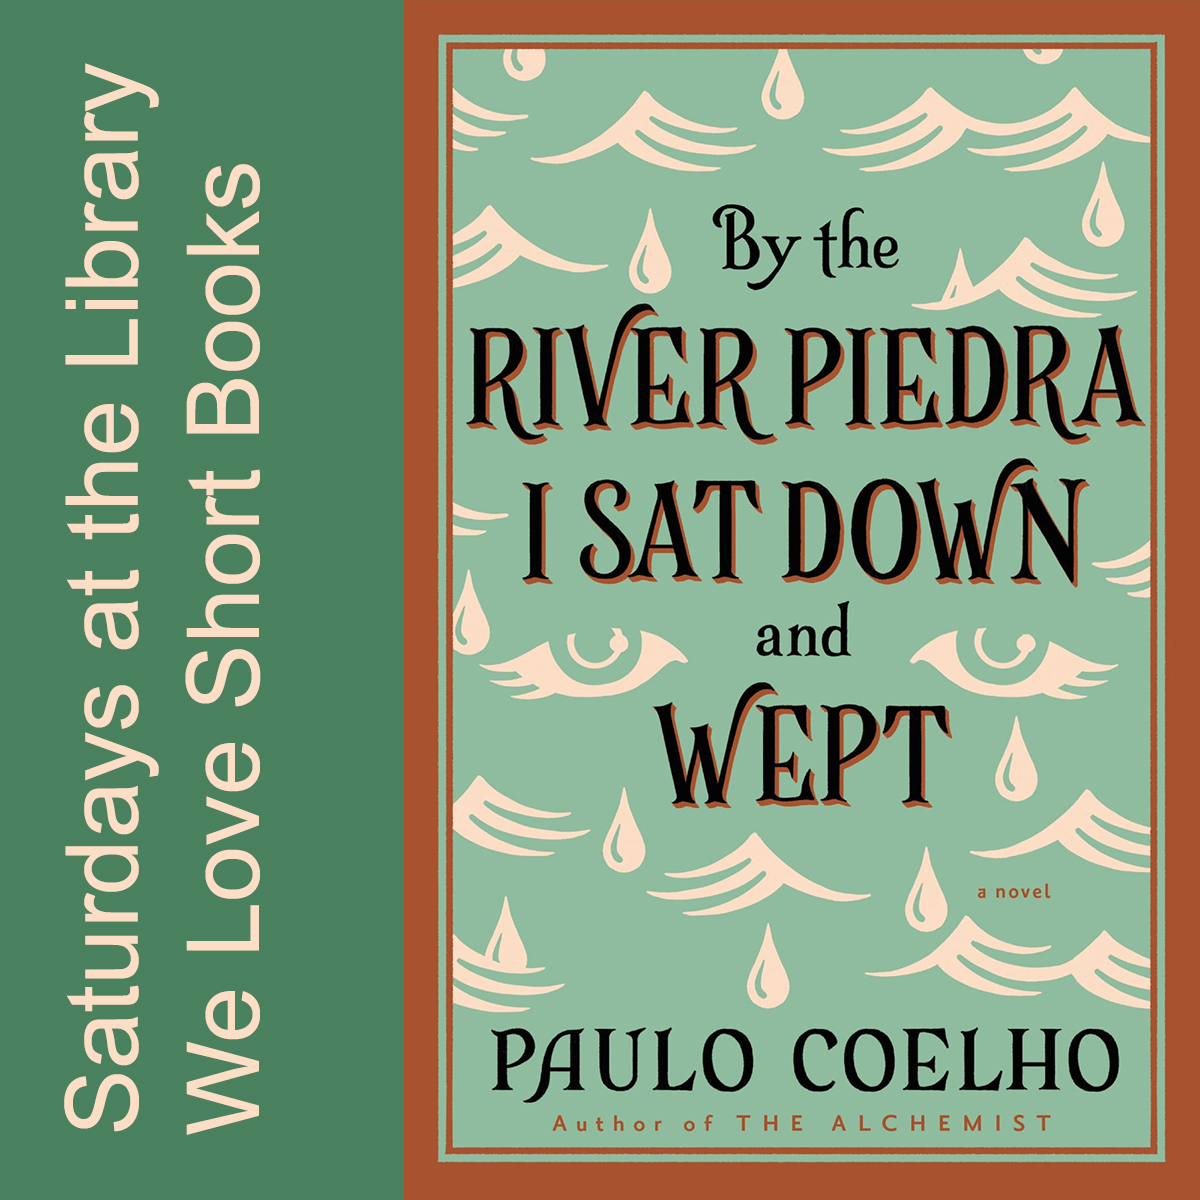 Green rectangle with white text reads saturdays at the library we love short books with book cover image of By the River Piedra I sat down and wept by Paulo Coelho